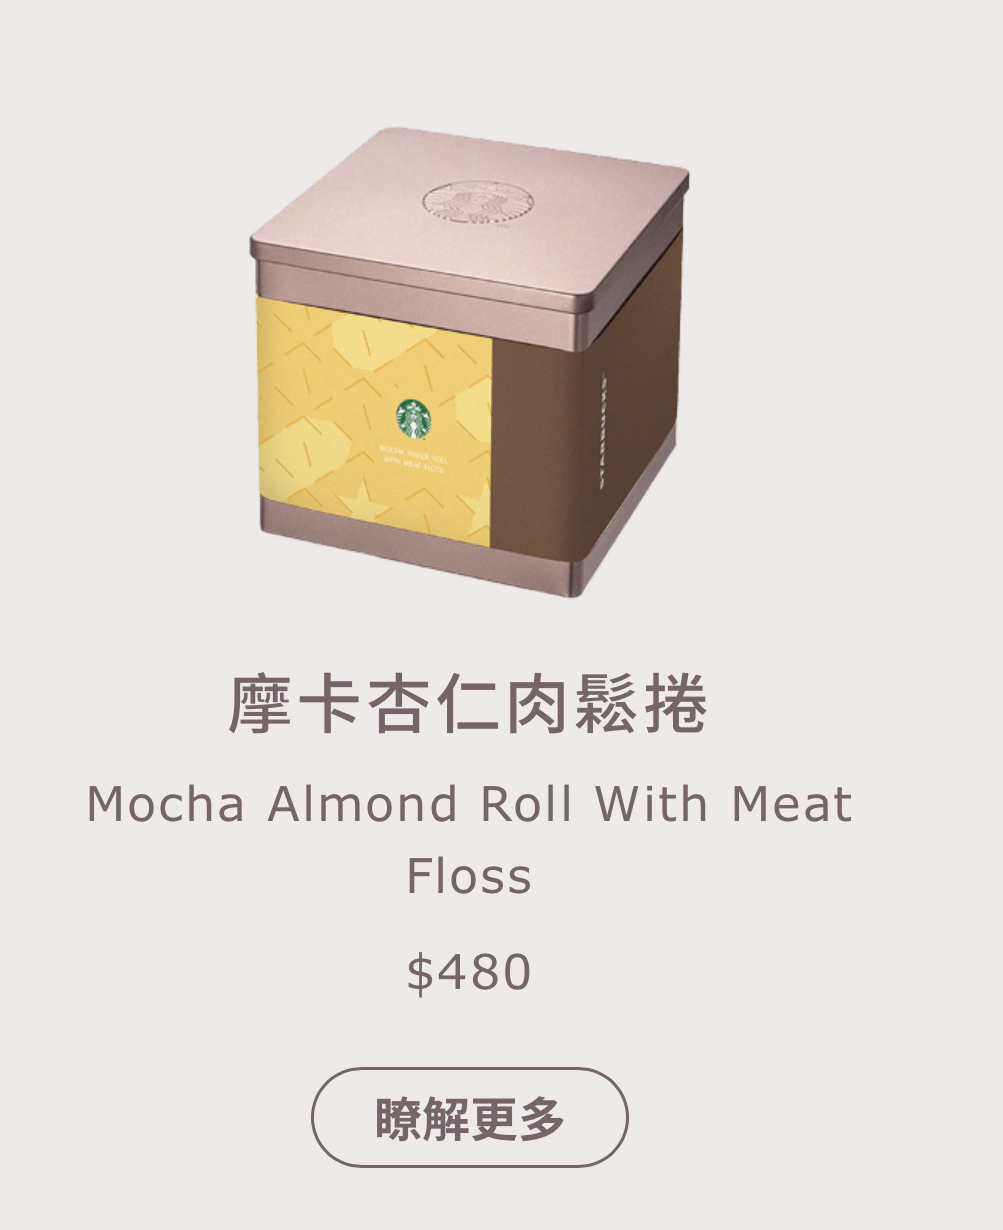 Mocha Almond Roll with Meat Floss